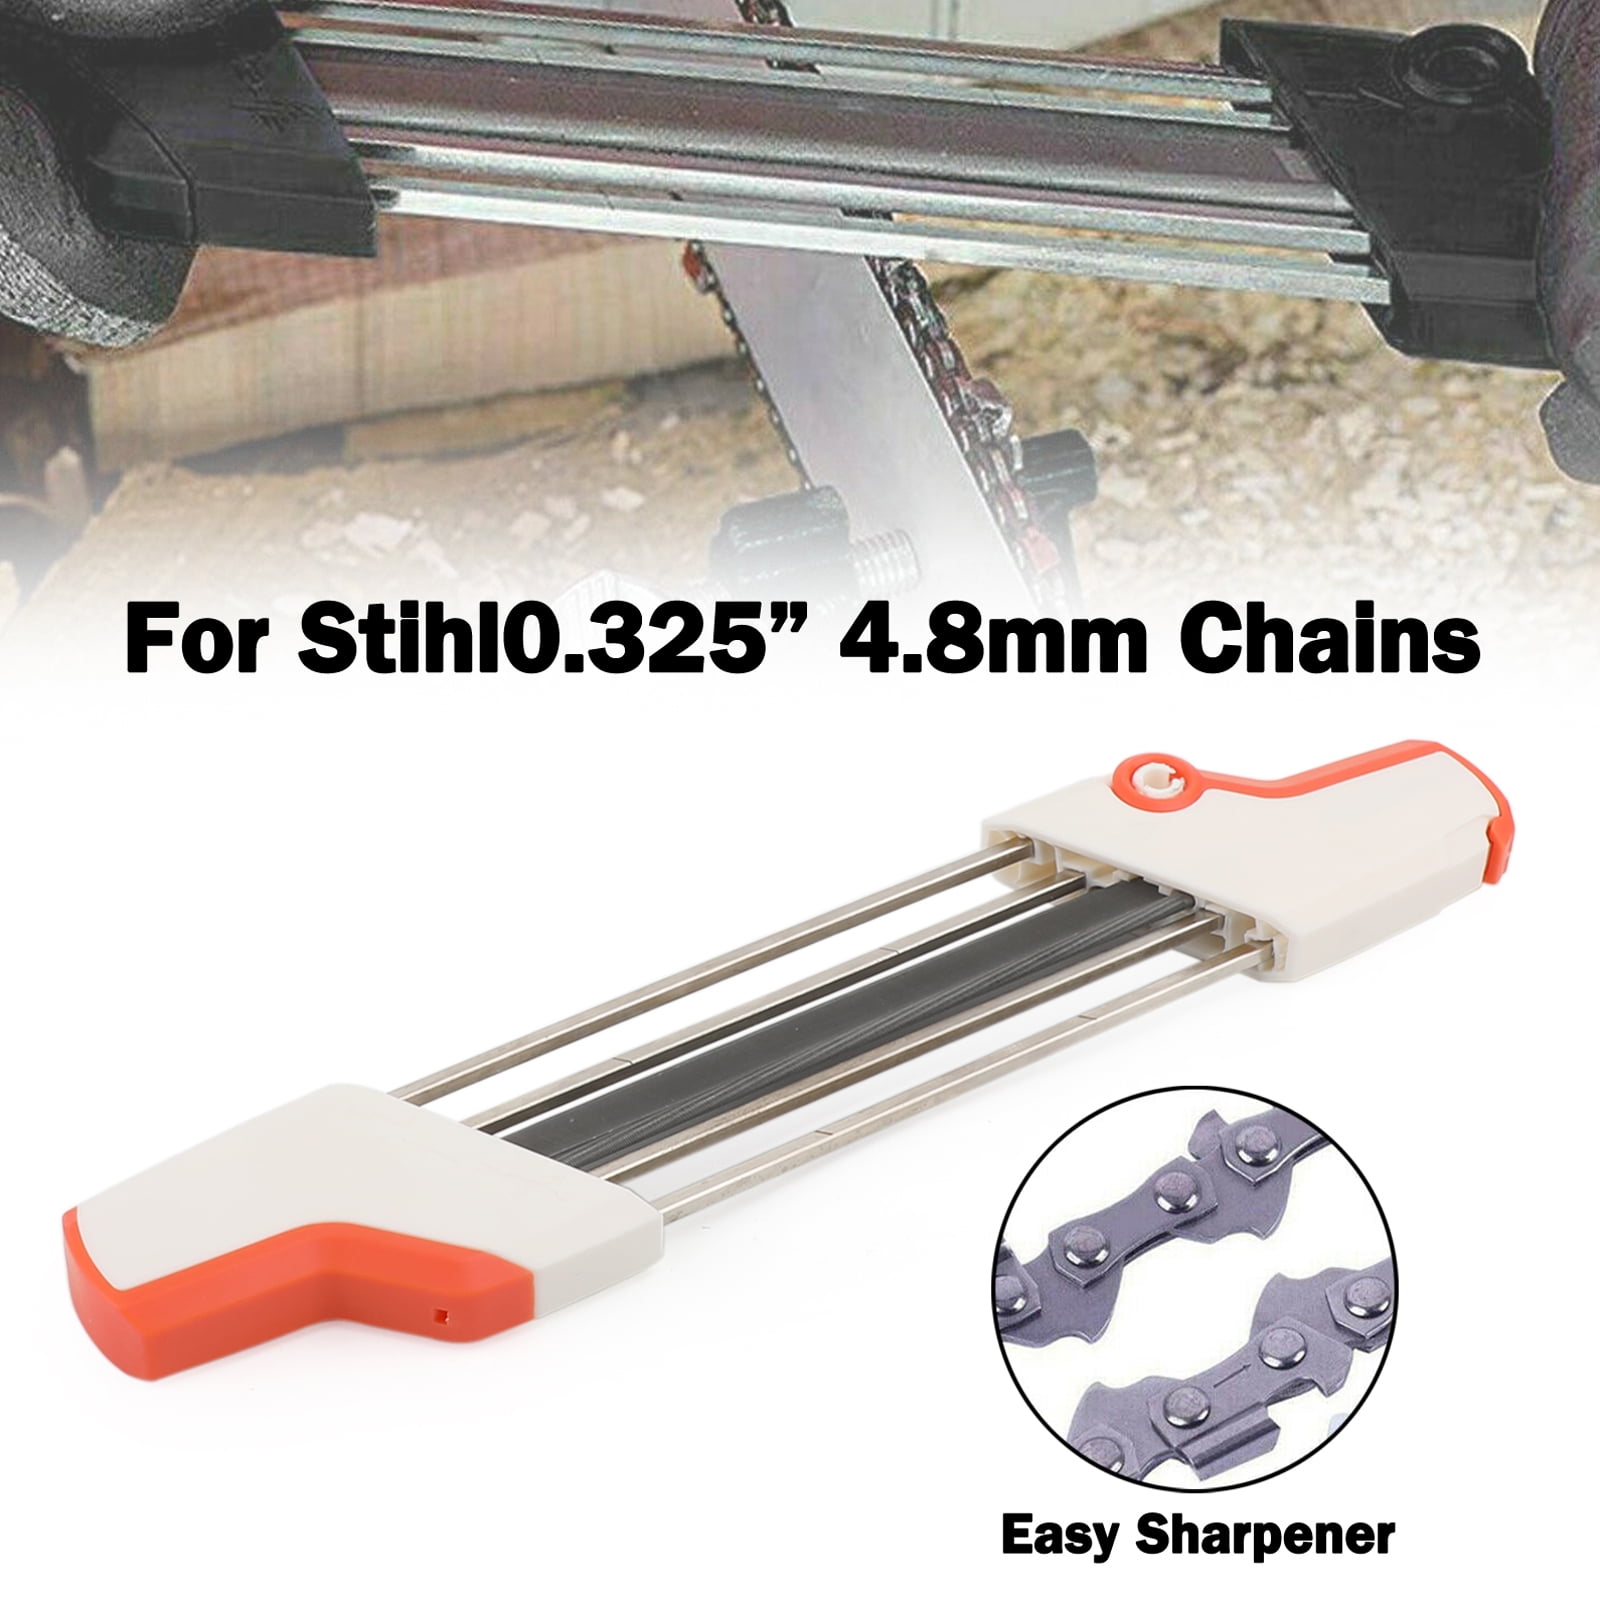 WINDSOR CHAIN SAW CHAIN GRINDER-SHARPENER 3/8" LO-PRO .325" 1/4" PITCH CHAINS 